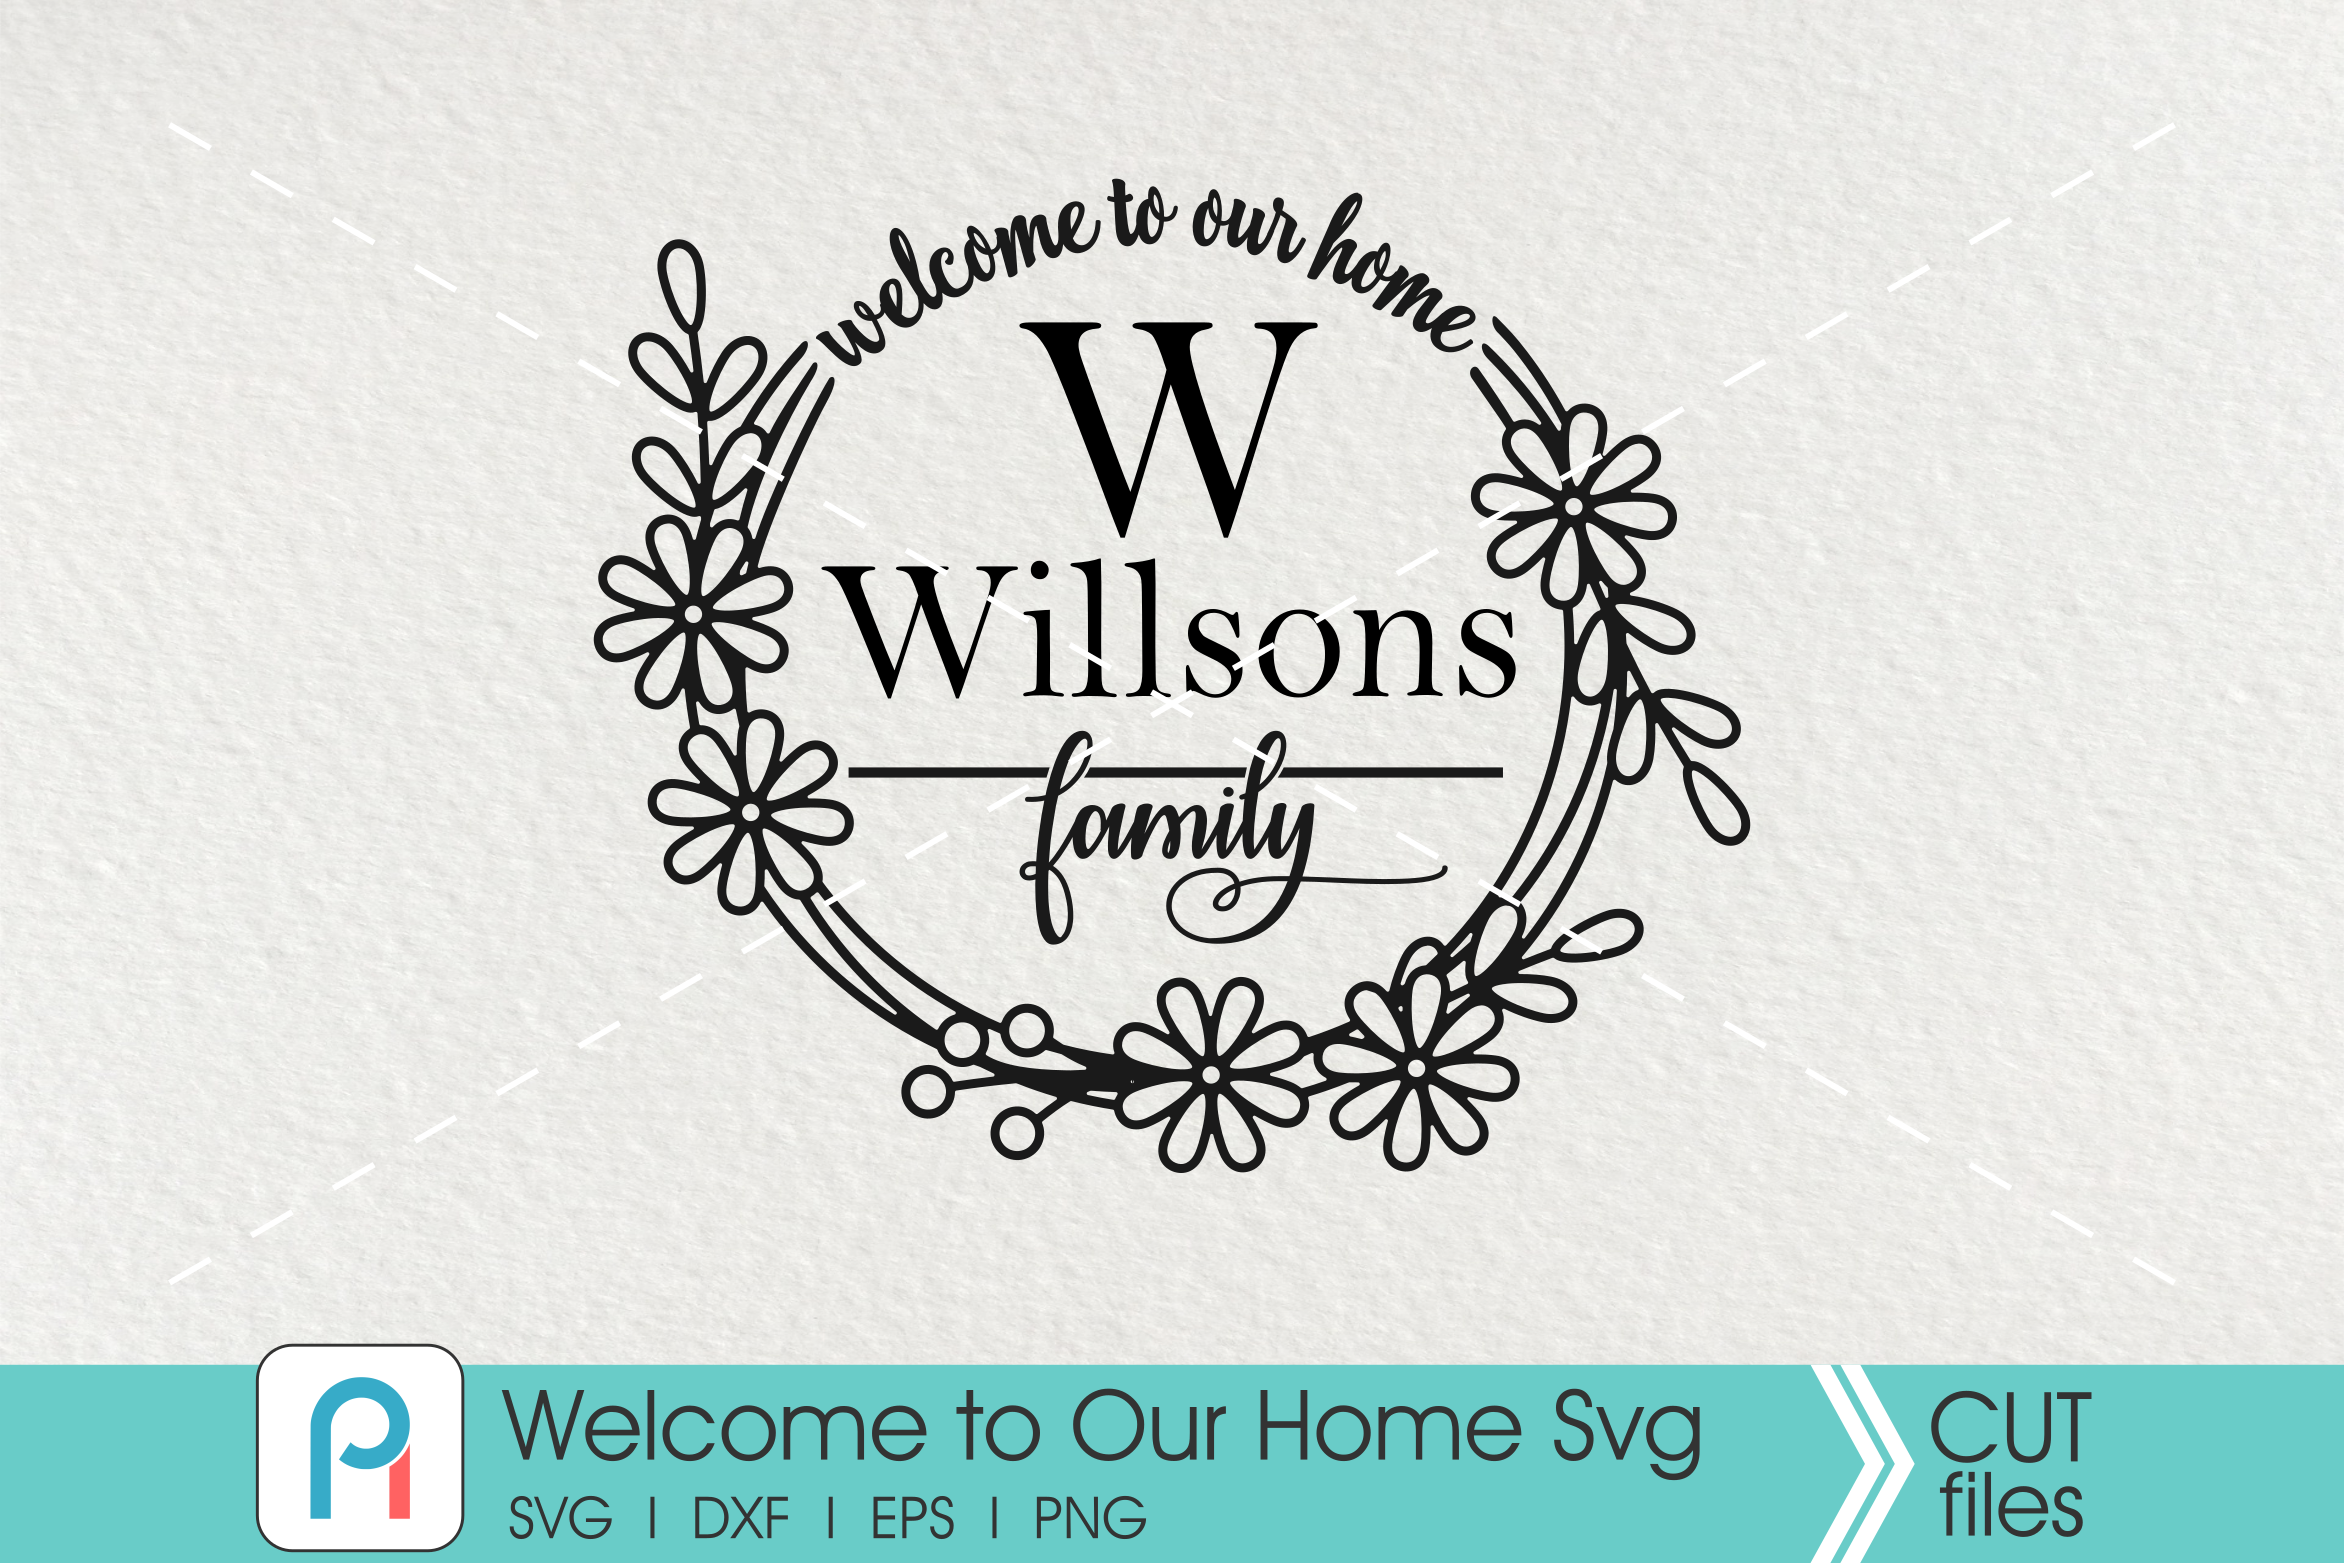 Download Welcome to Our Home Svg, Welcome Home Svg, Welcome Svg By ...